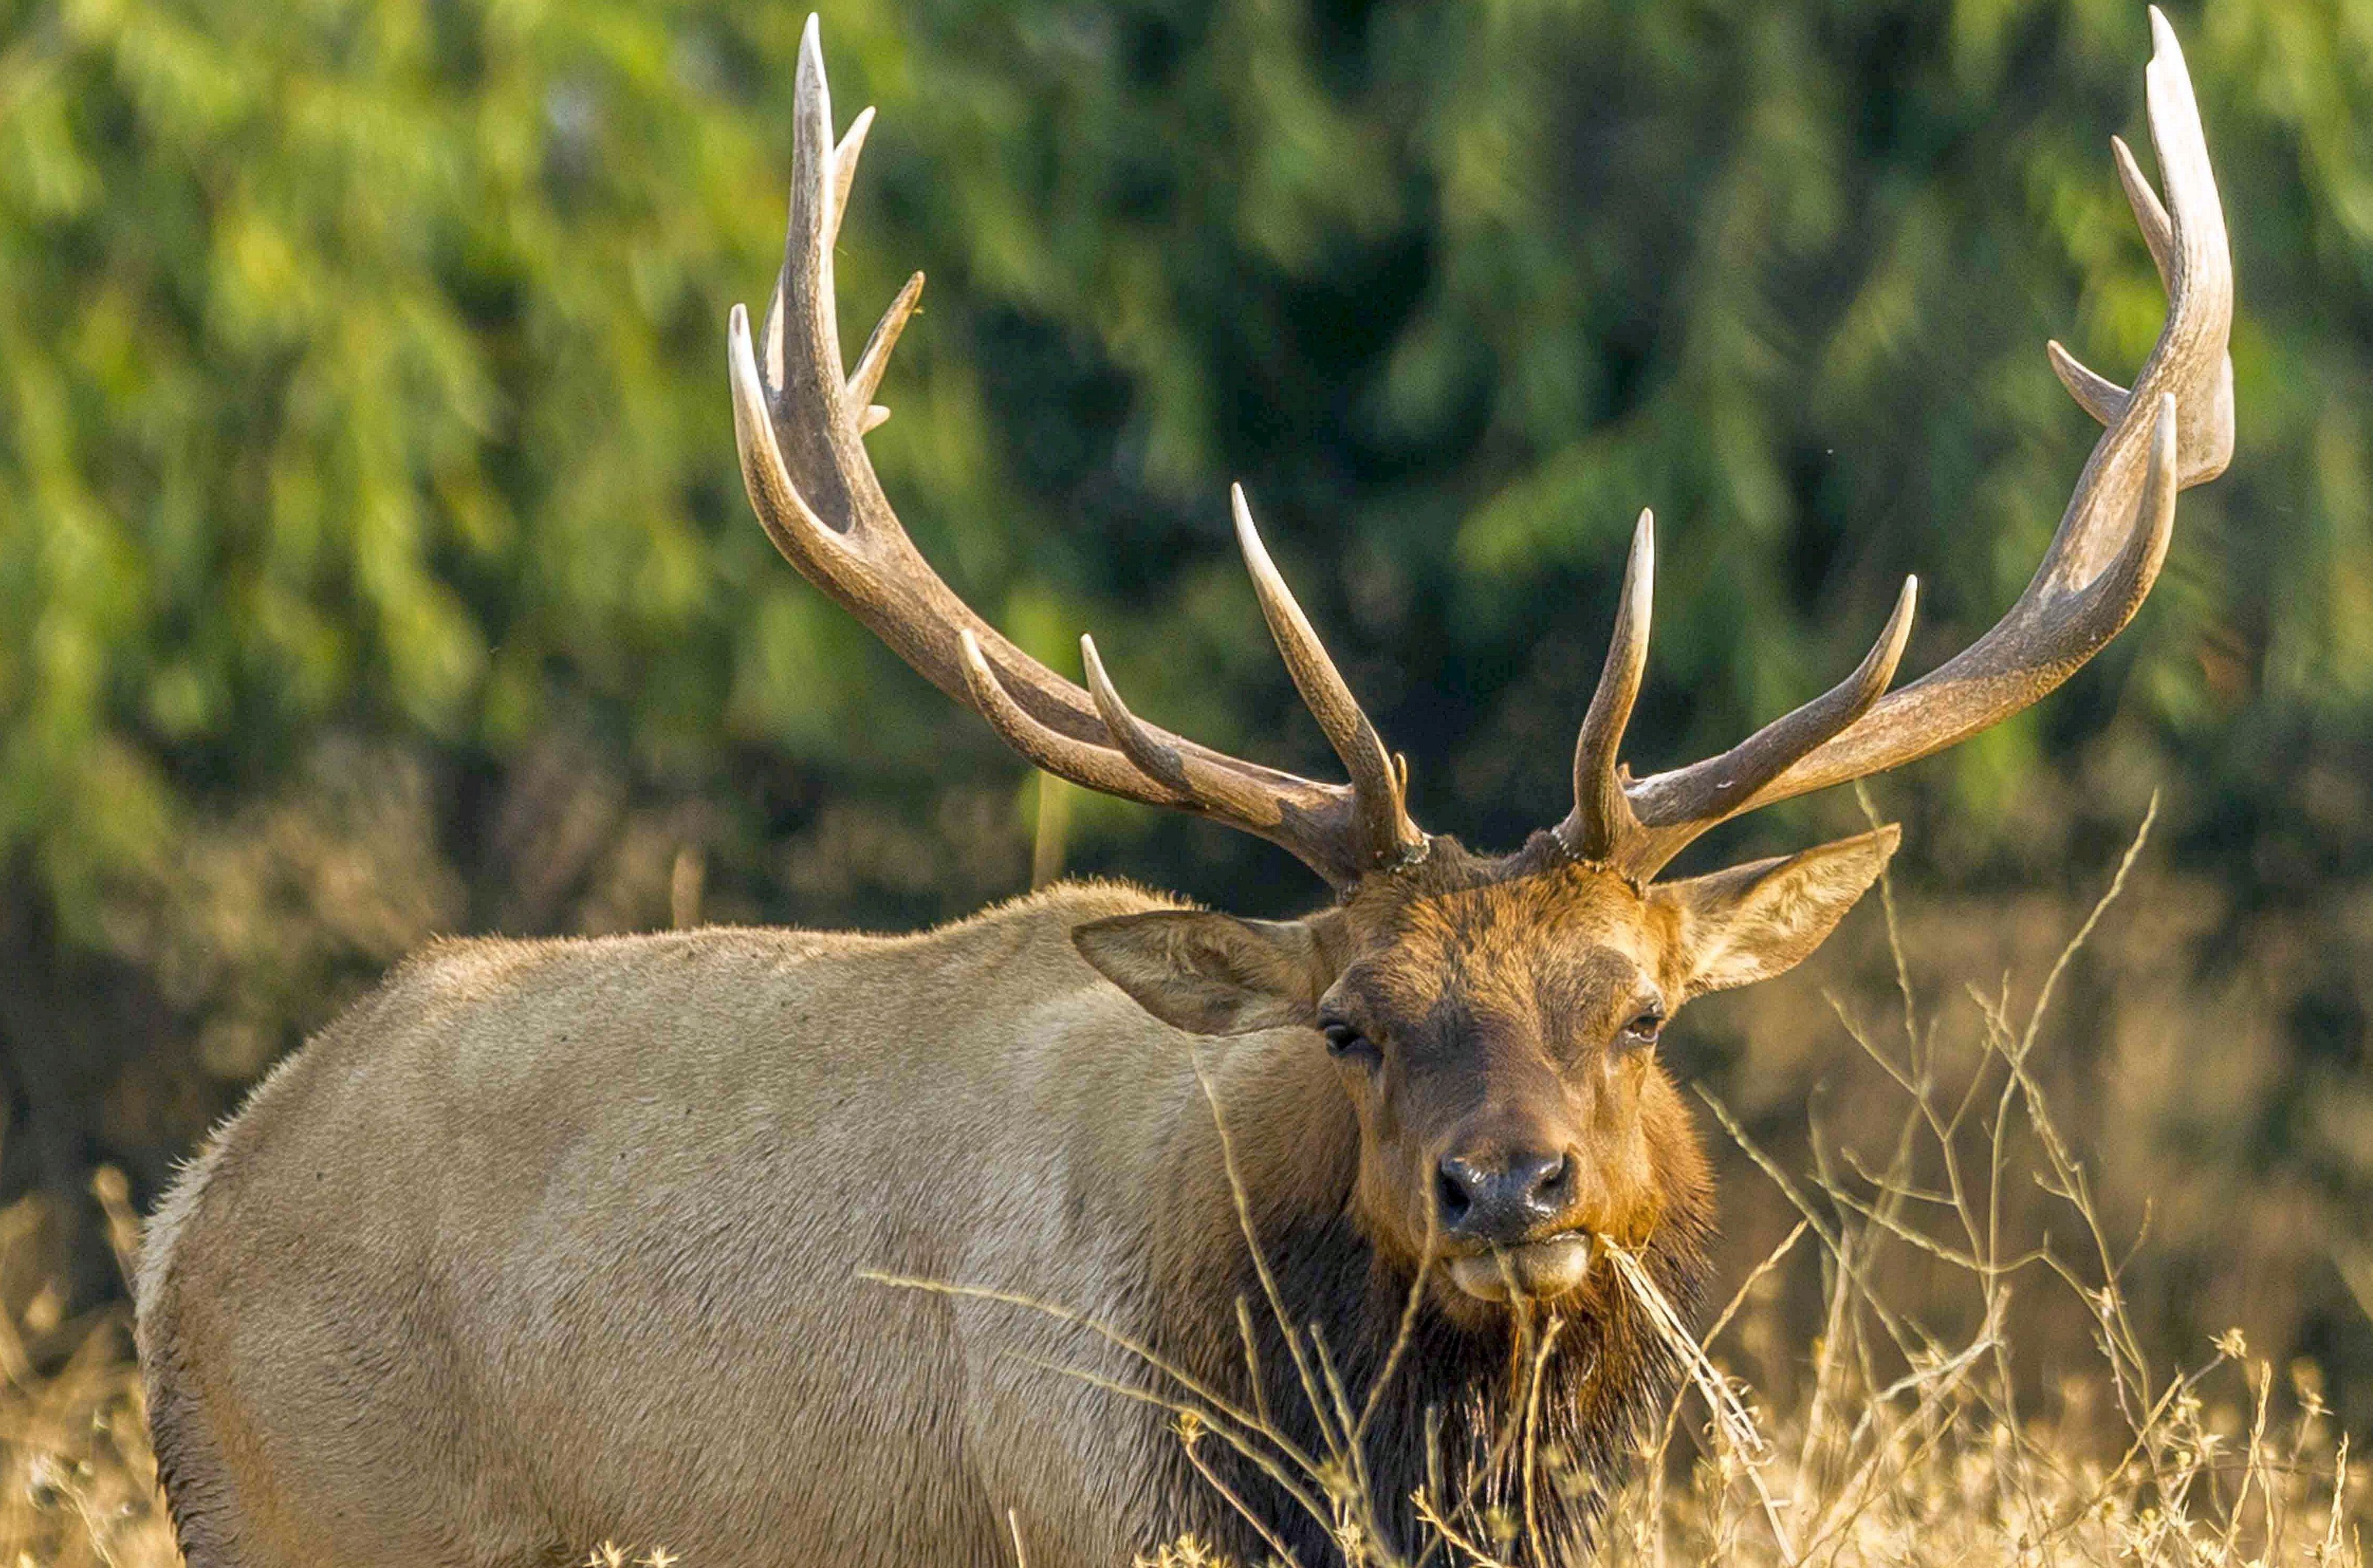 Tule elk selection of surface water and forage is mediated by season and  drought – California Fish and Wildlife Scientific Journal